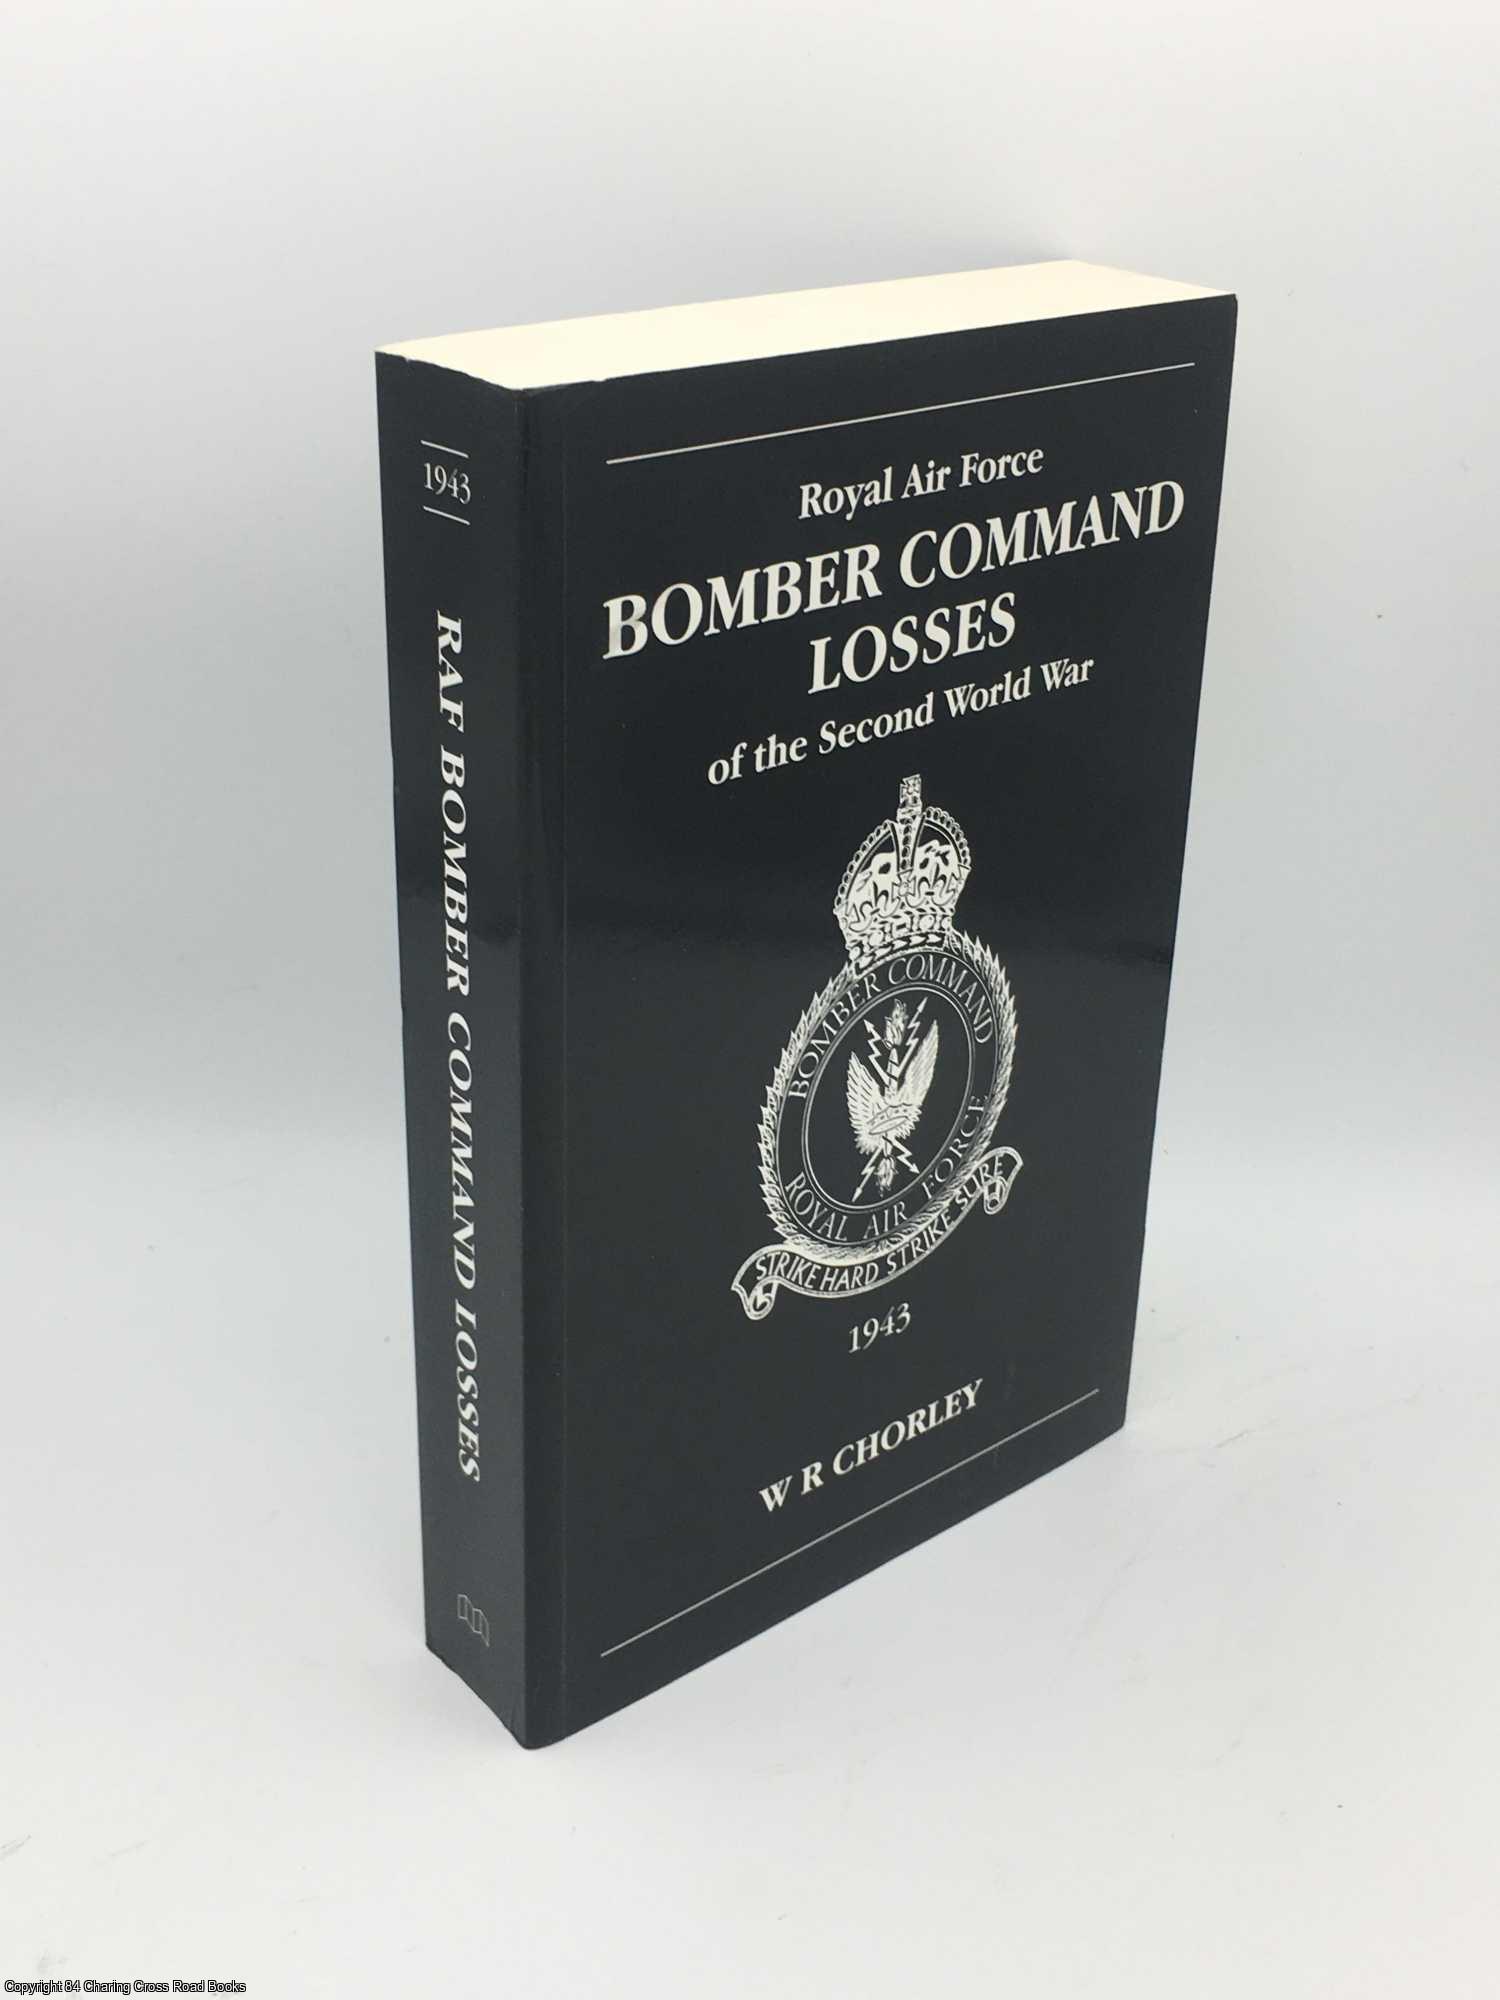 Chorley, W. R. - RAF Bomber Command Losses of the Second World War, Vol. 4: 1943